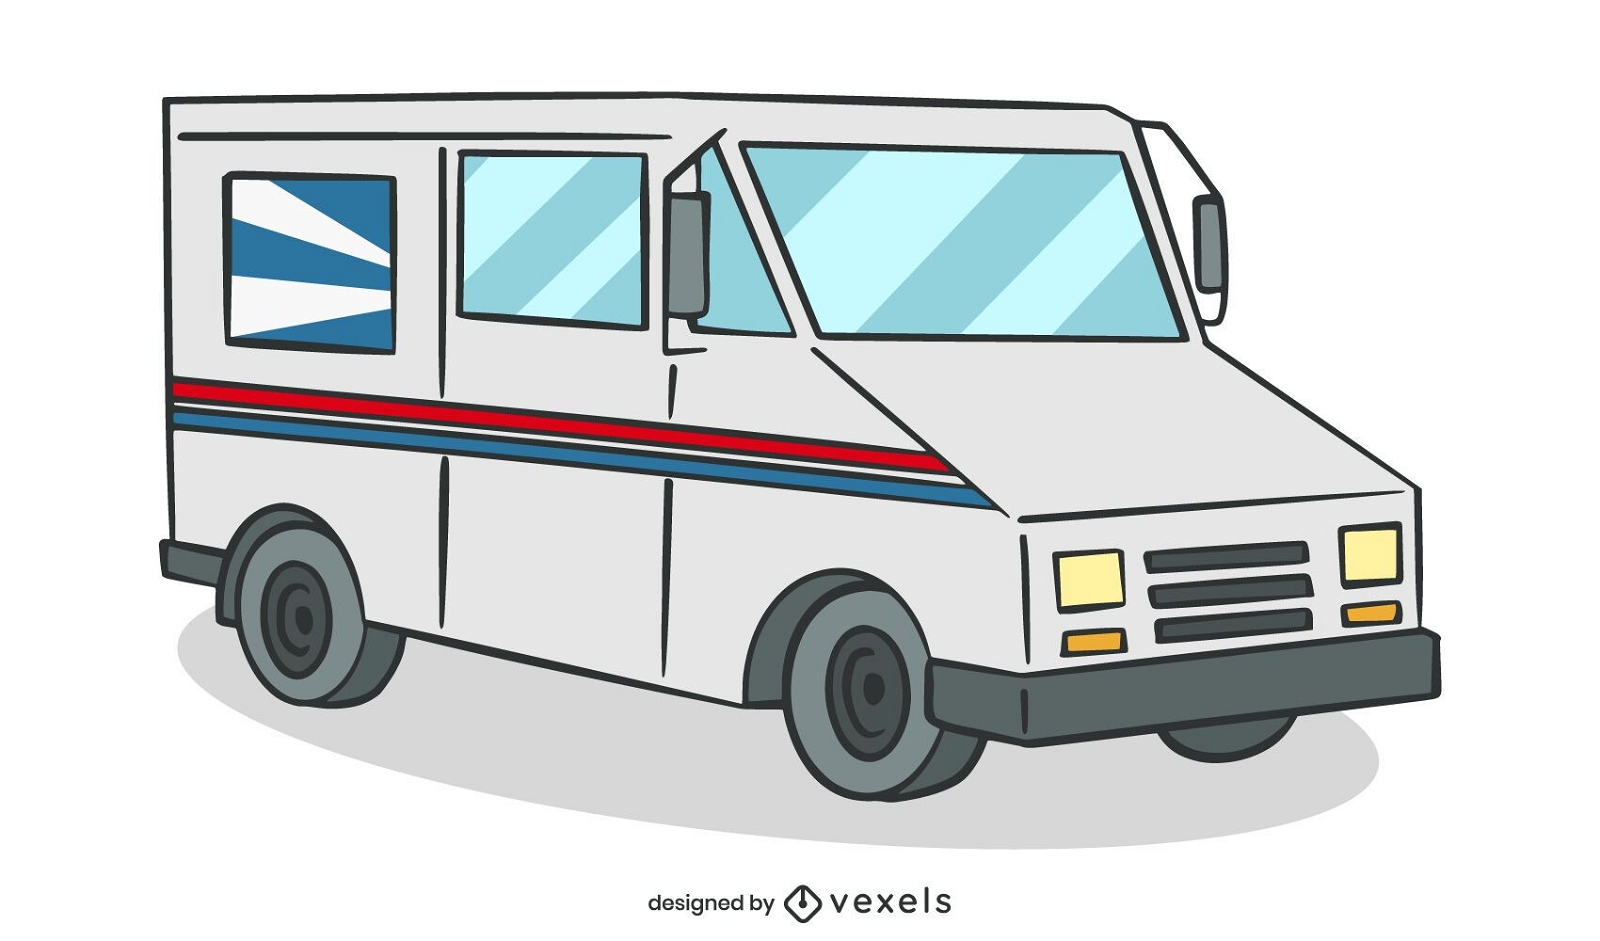 Post office delivery truck illustration